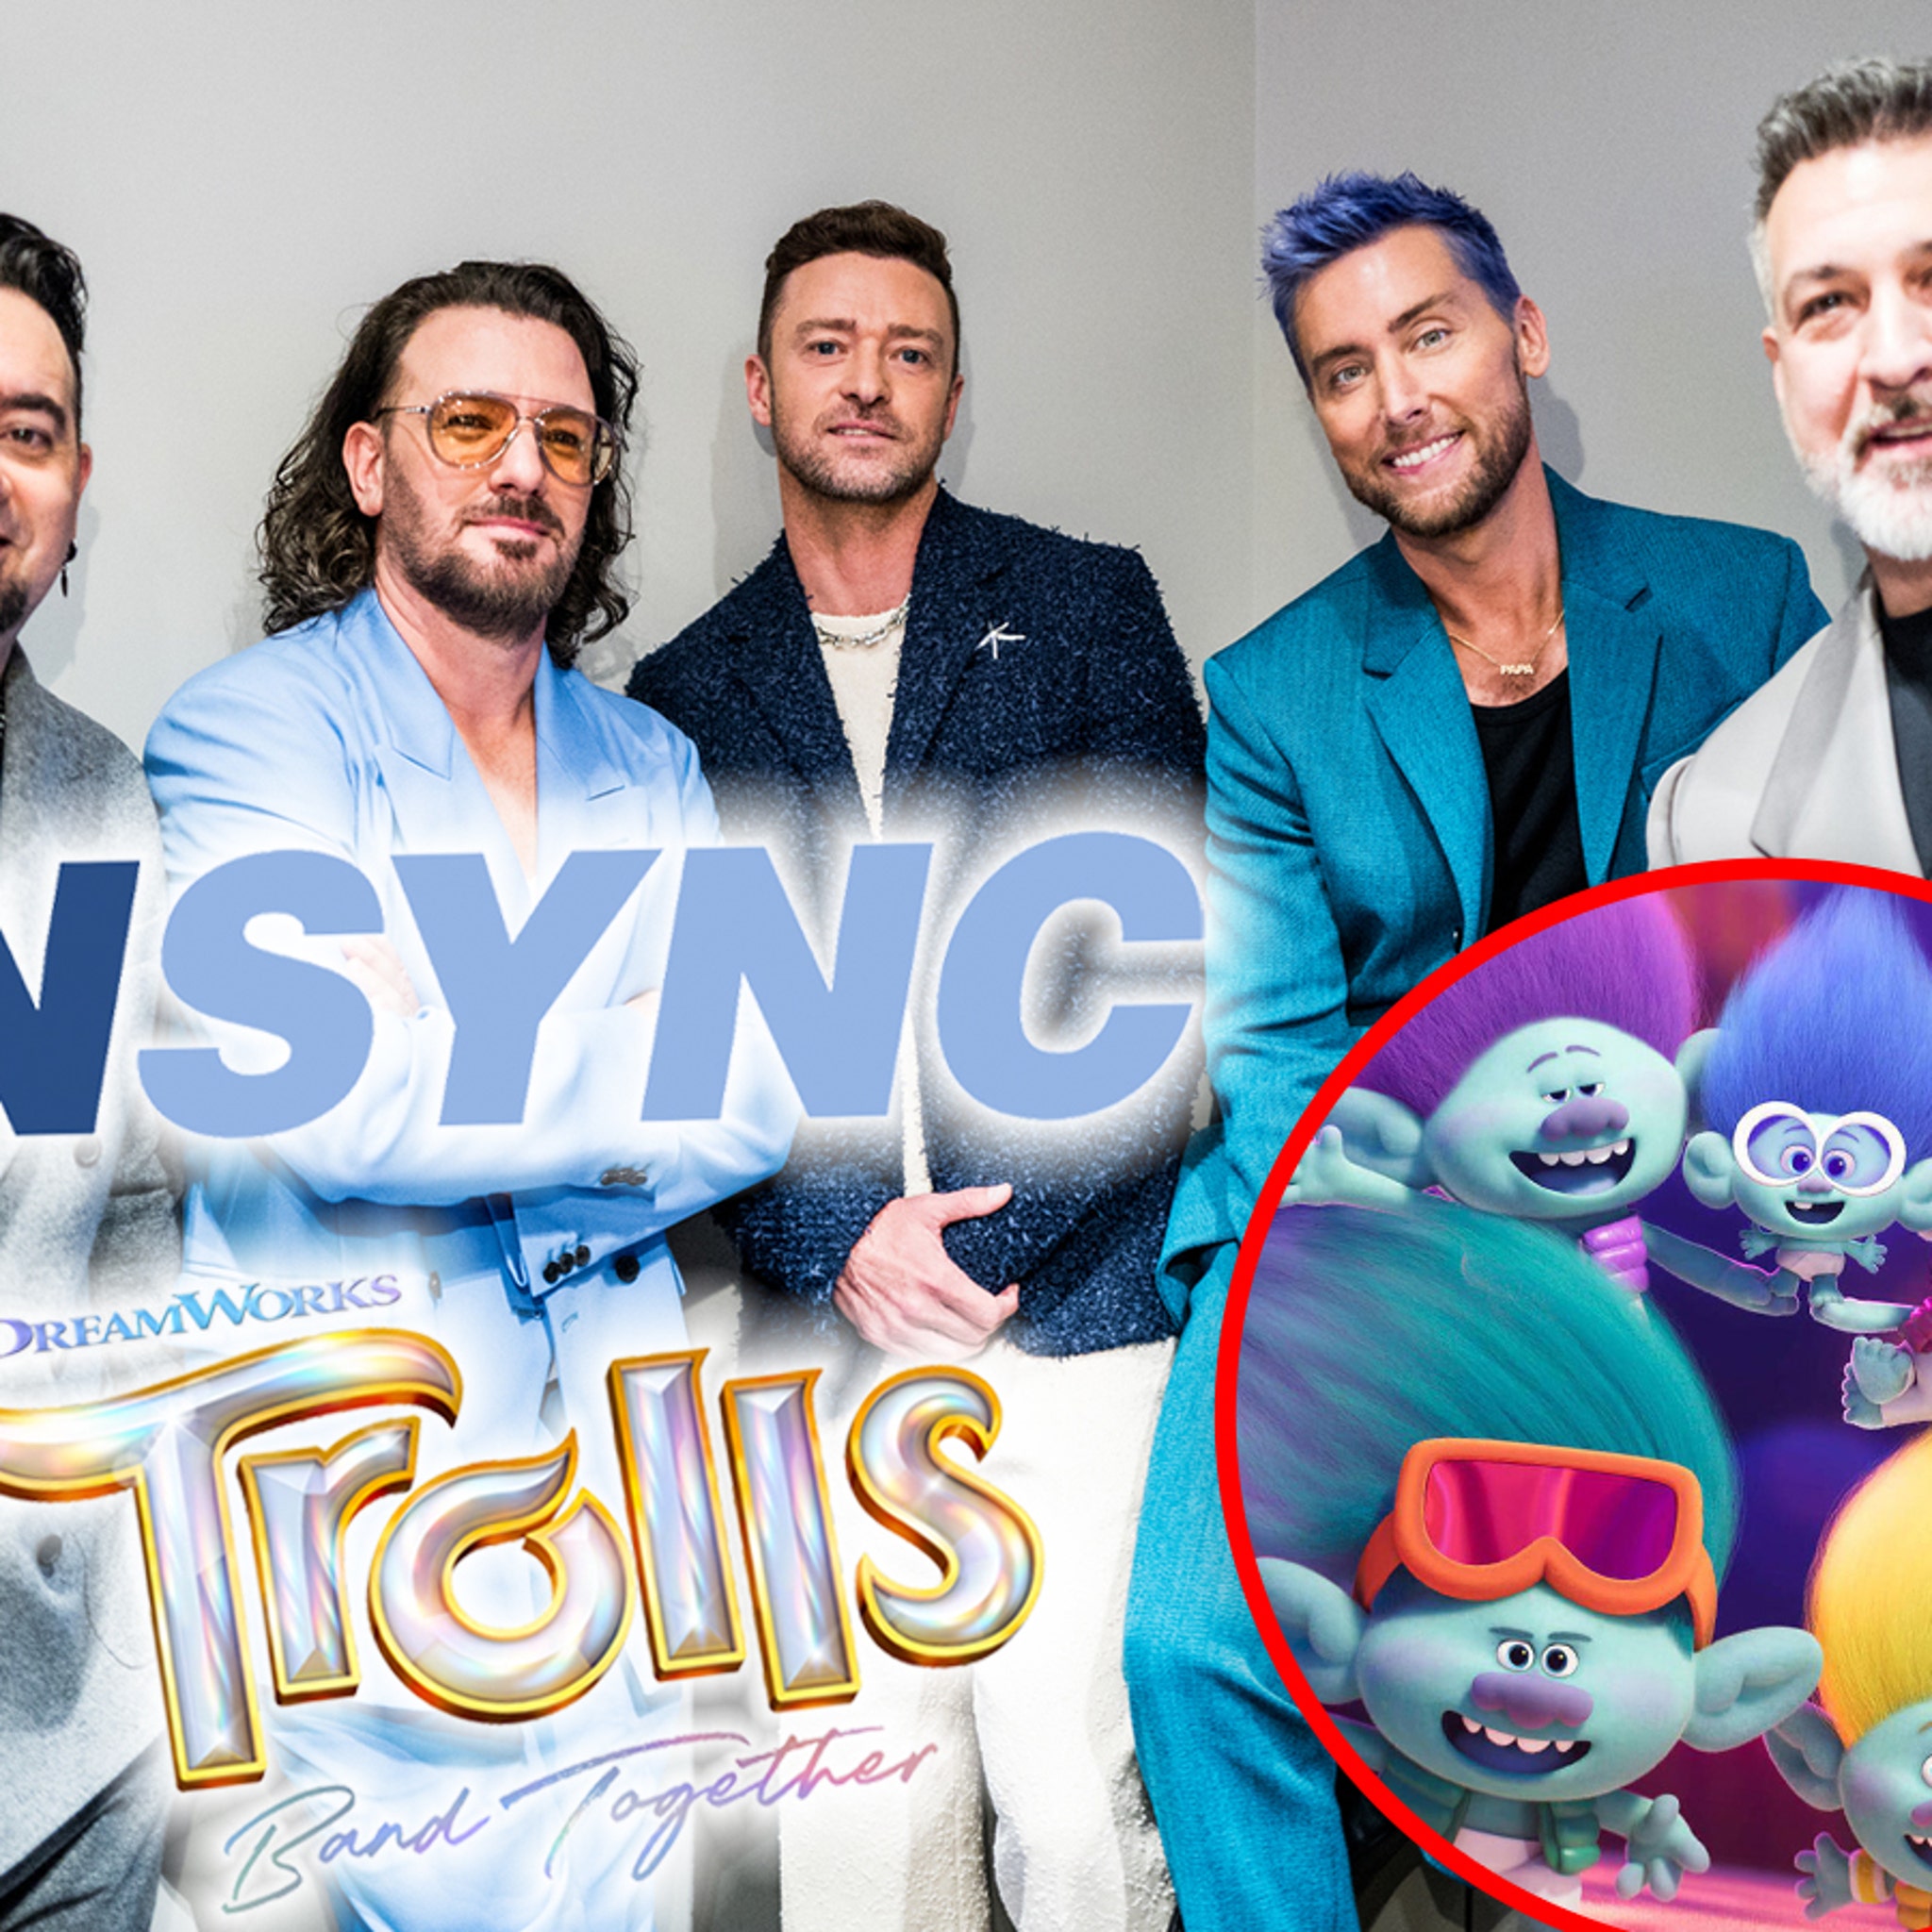 Justin Timberlake teases that NSYNC 'knows something